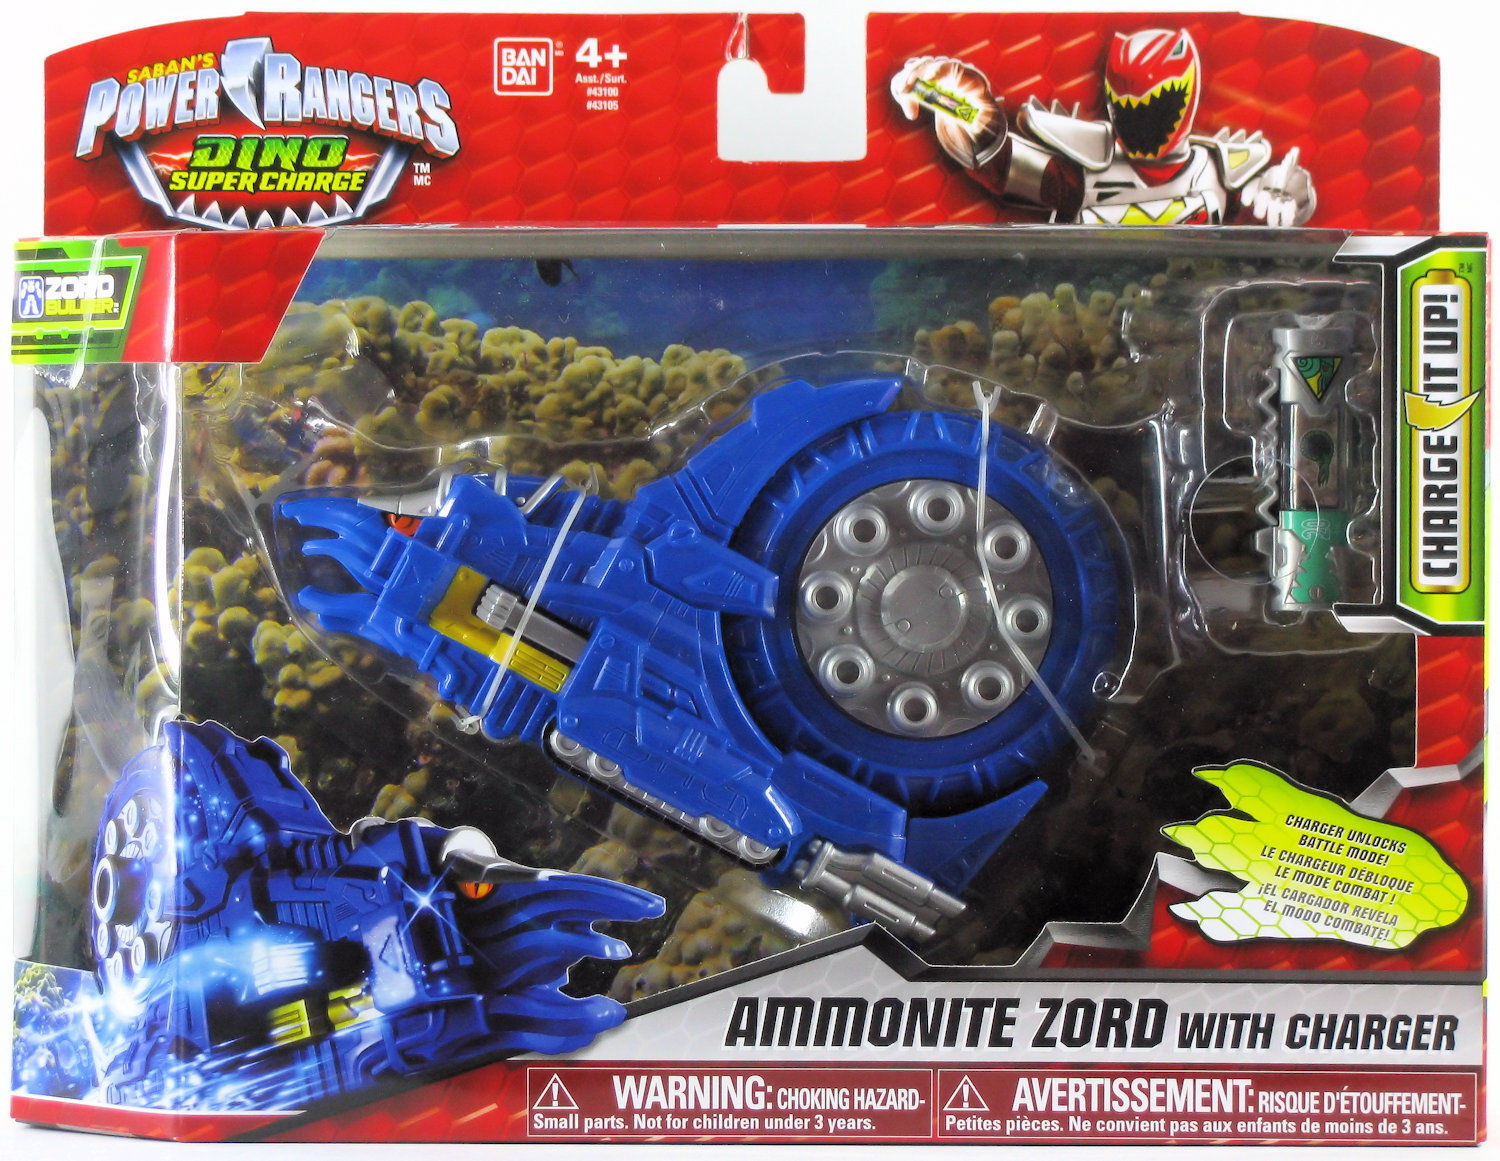 Power Rangers Dino Super Charge Ammonite Zord with Charger